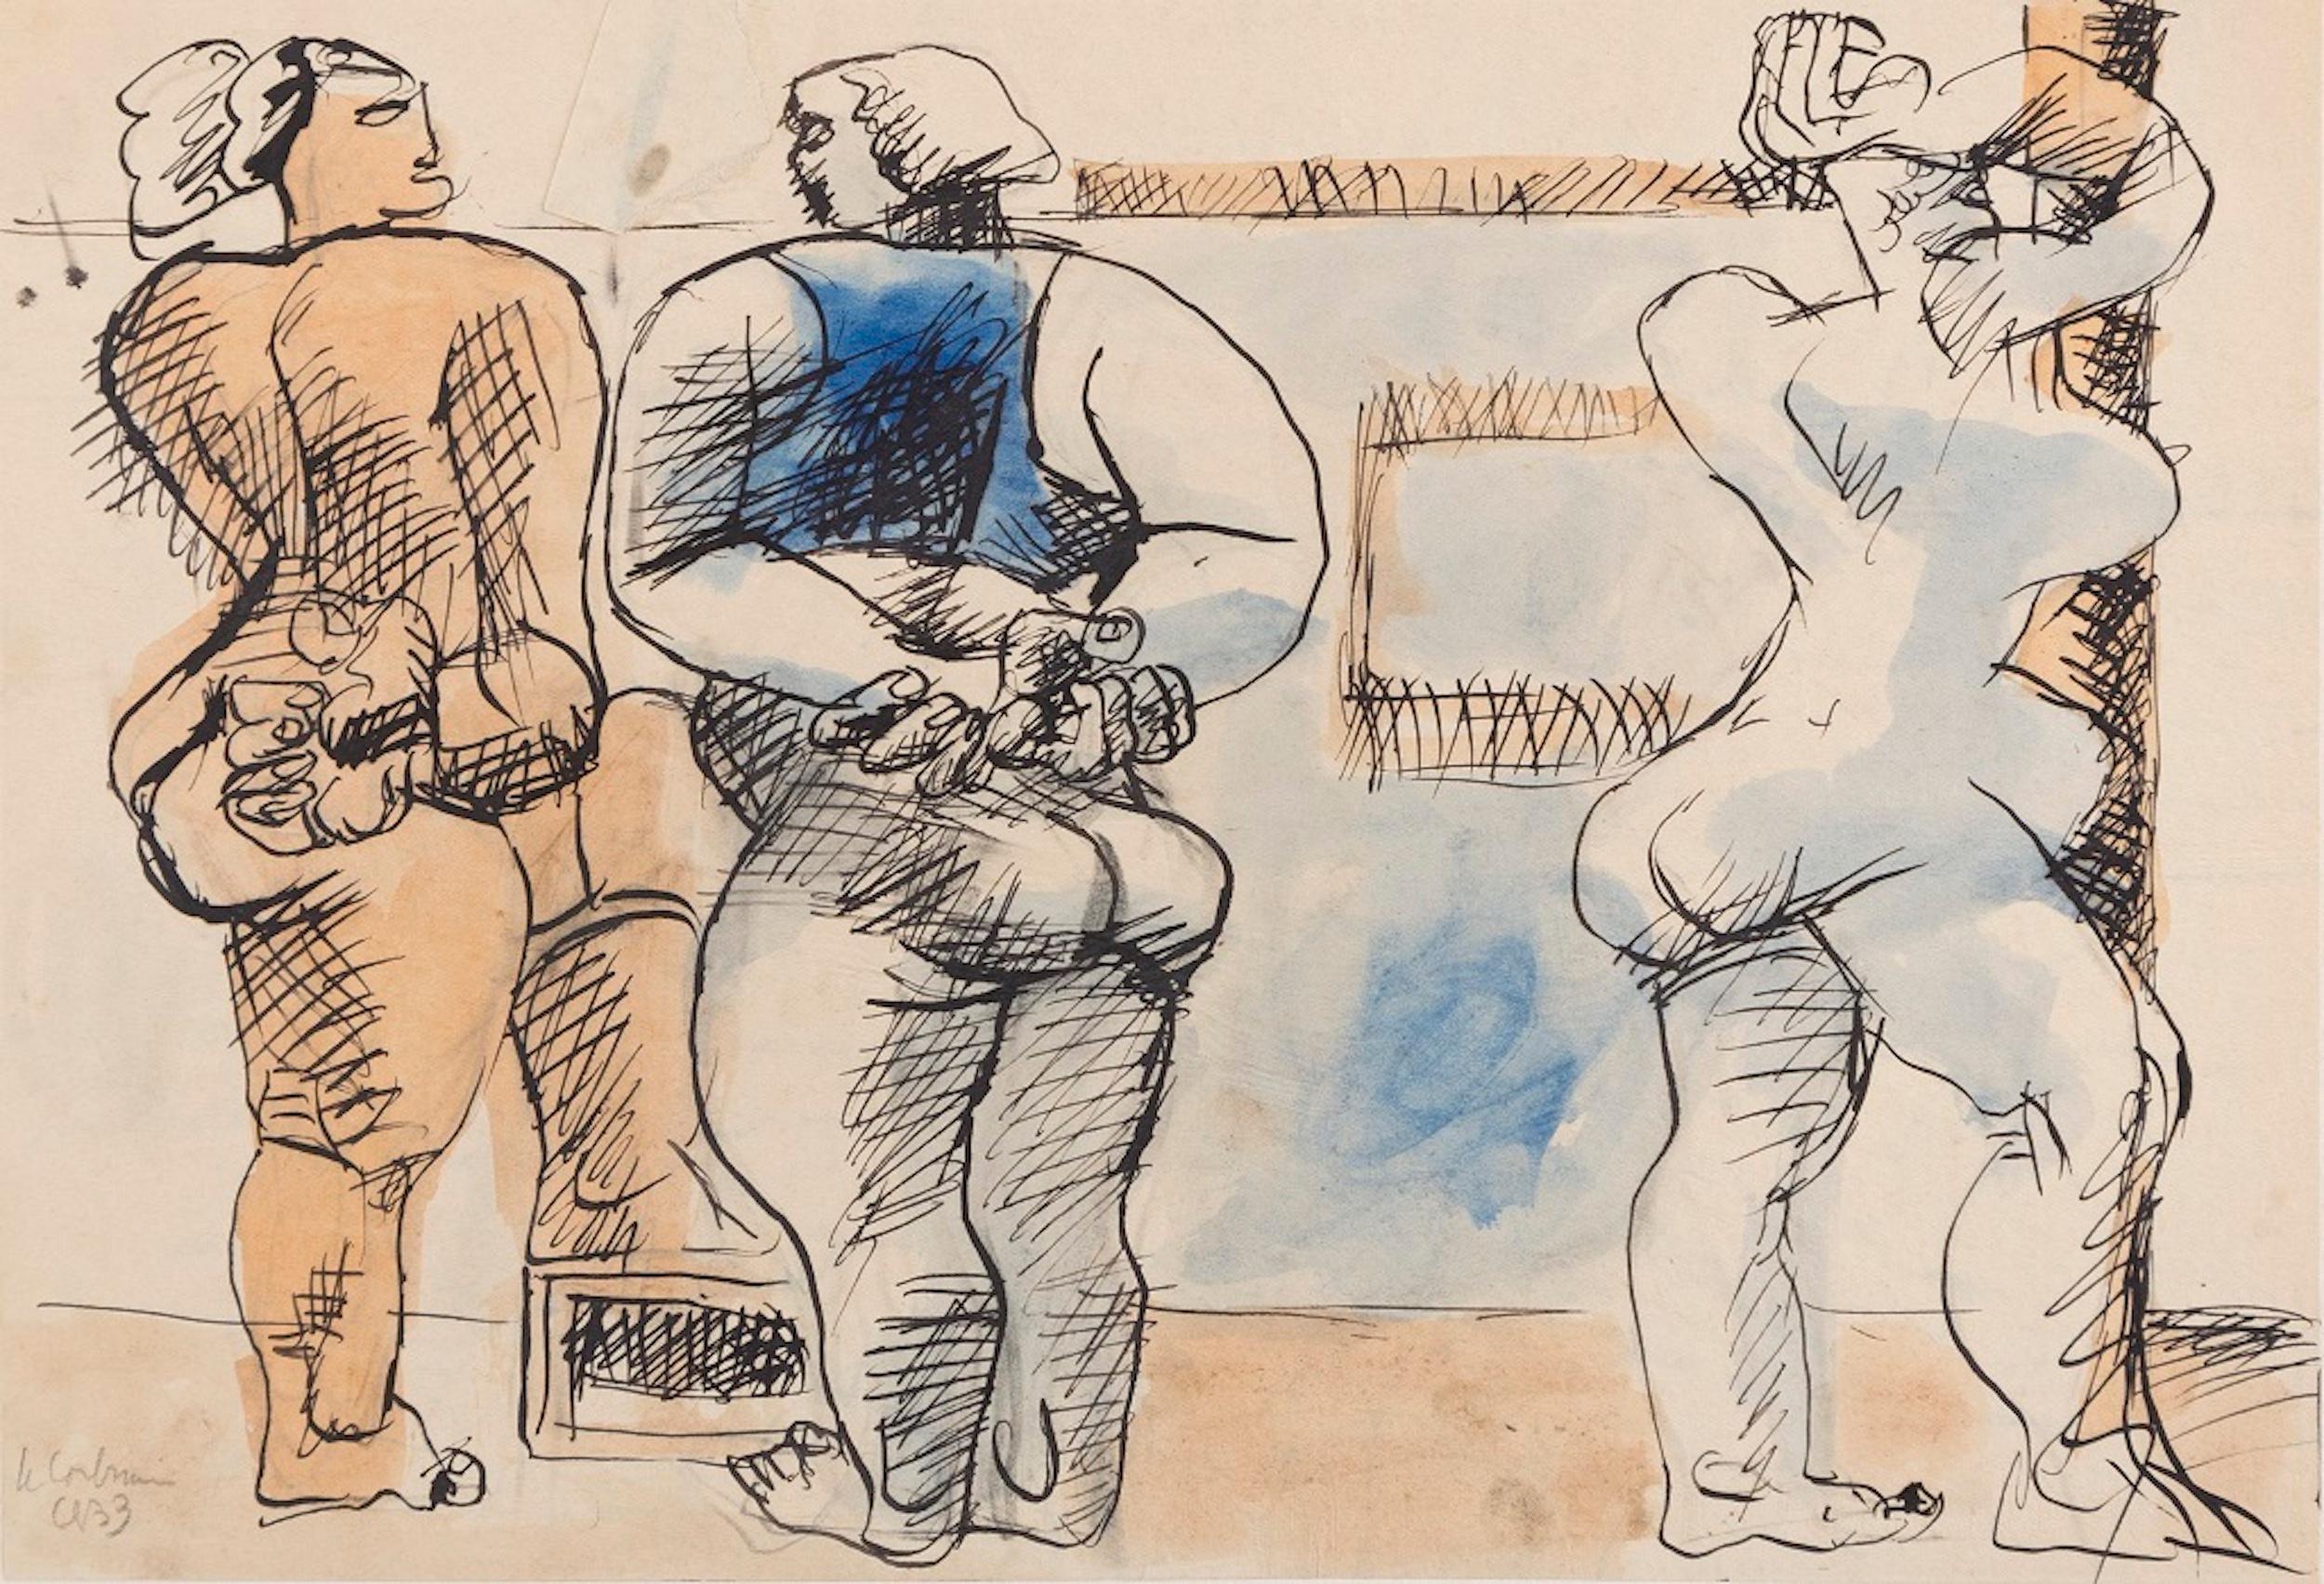 Trois femmes debout is an original China ink and watercolored drawing on paper realized in 1933 by Le Corbusier (La Chaux-de-Fonds 1887 - Roccabruna 1965).

Signature and year of creation hand-written in pencil at the bottom left and on the